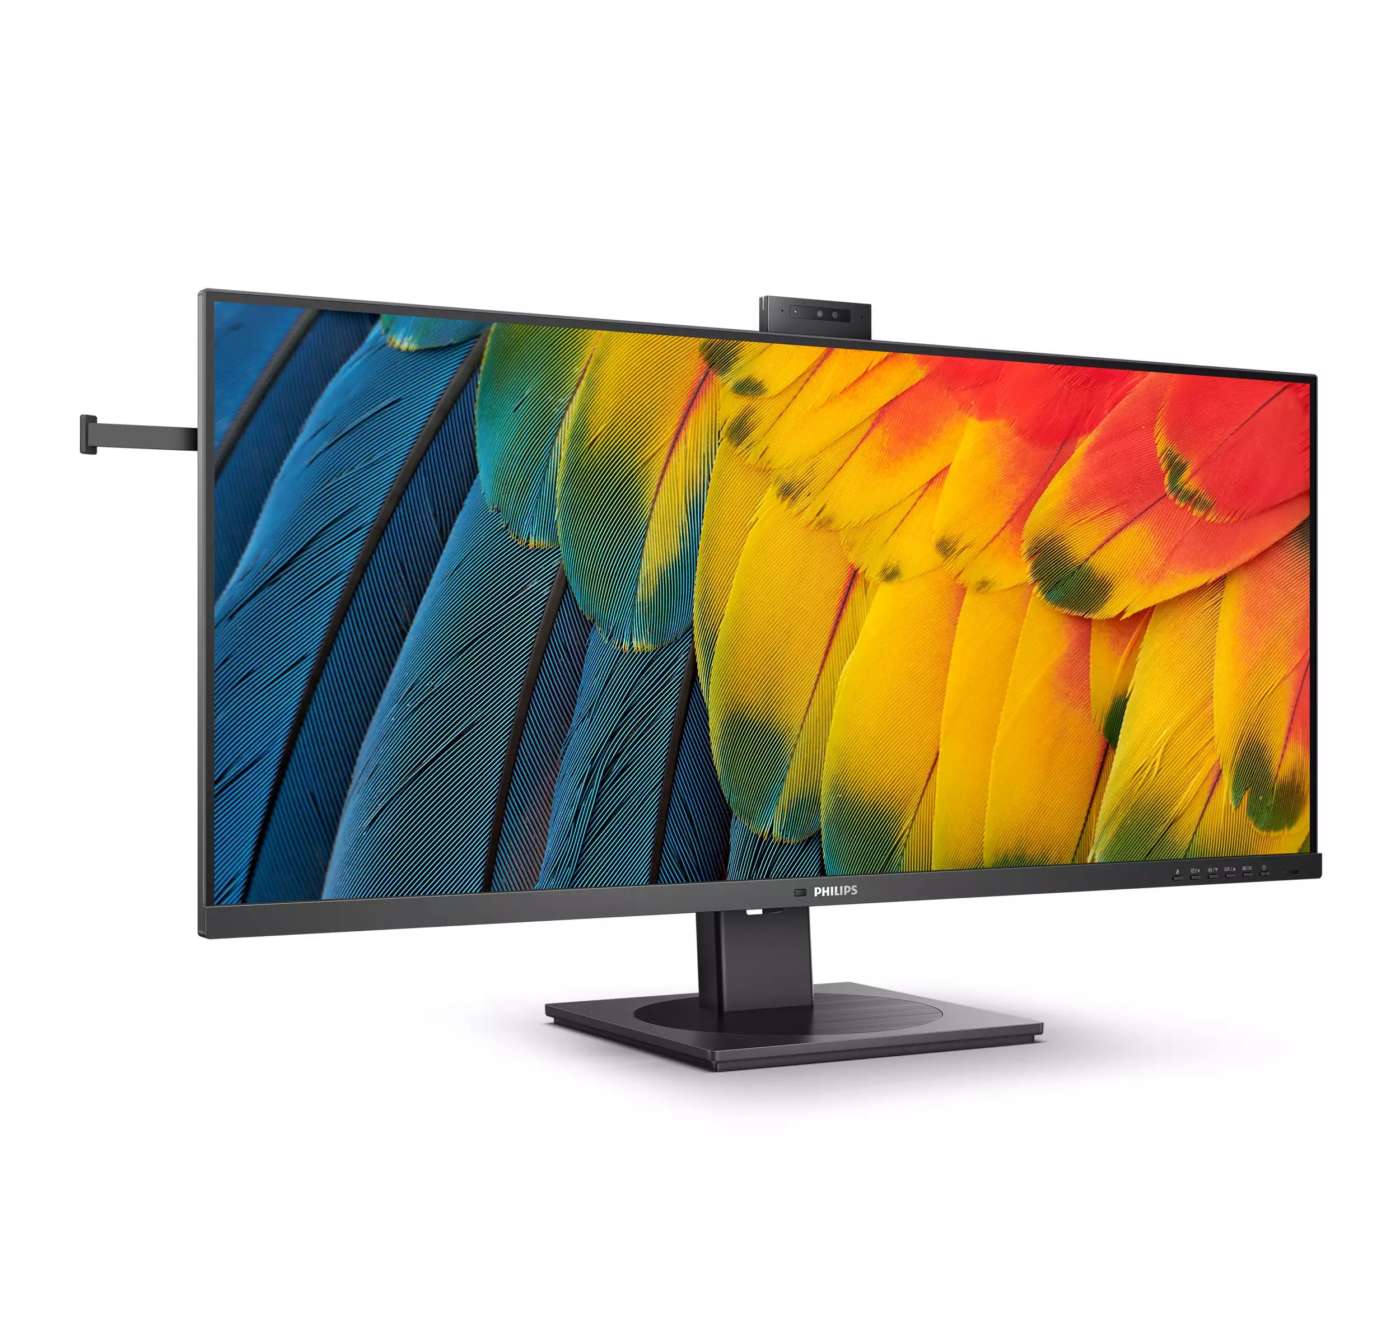 Philips presents two new professional monitors